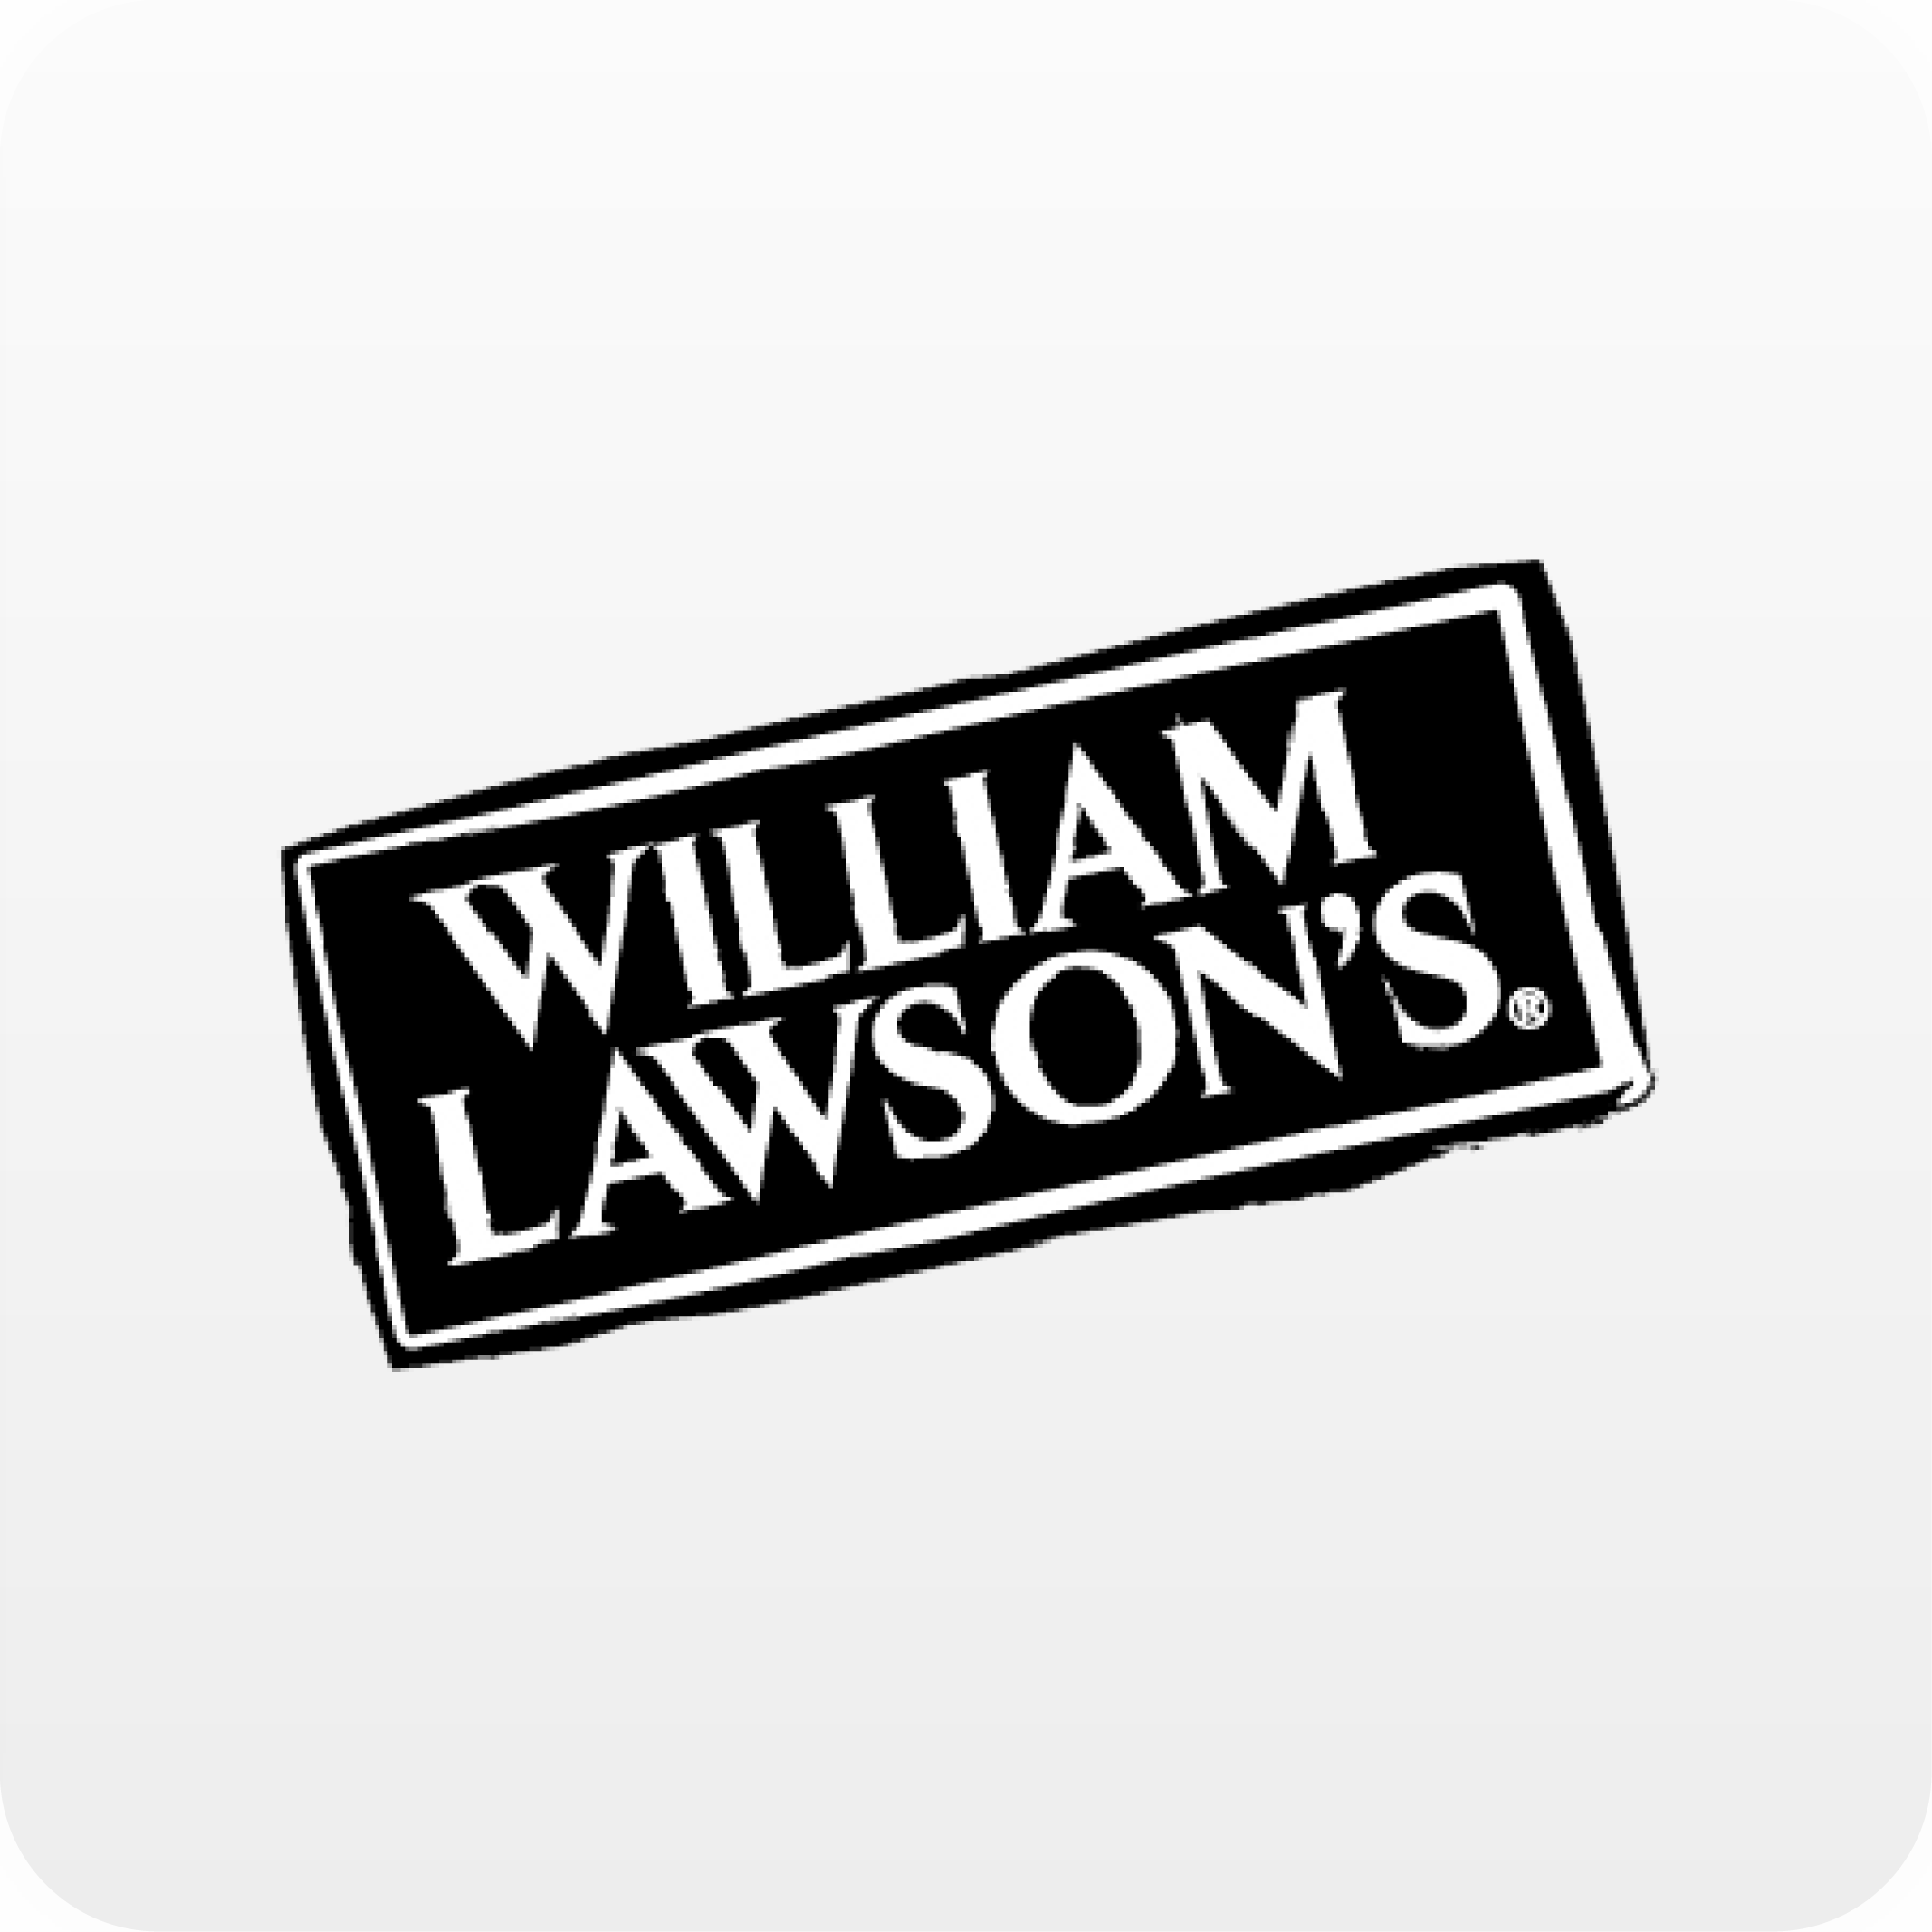 William Lawson Projects :: Photos, videos, logos, illustrations